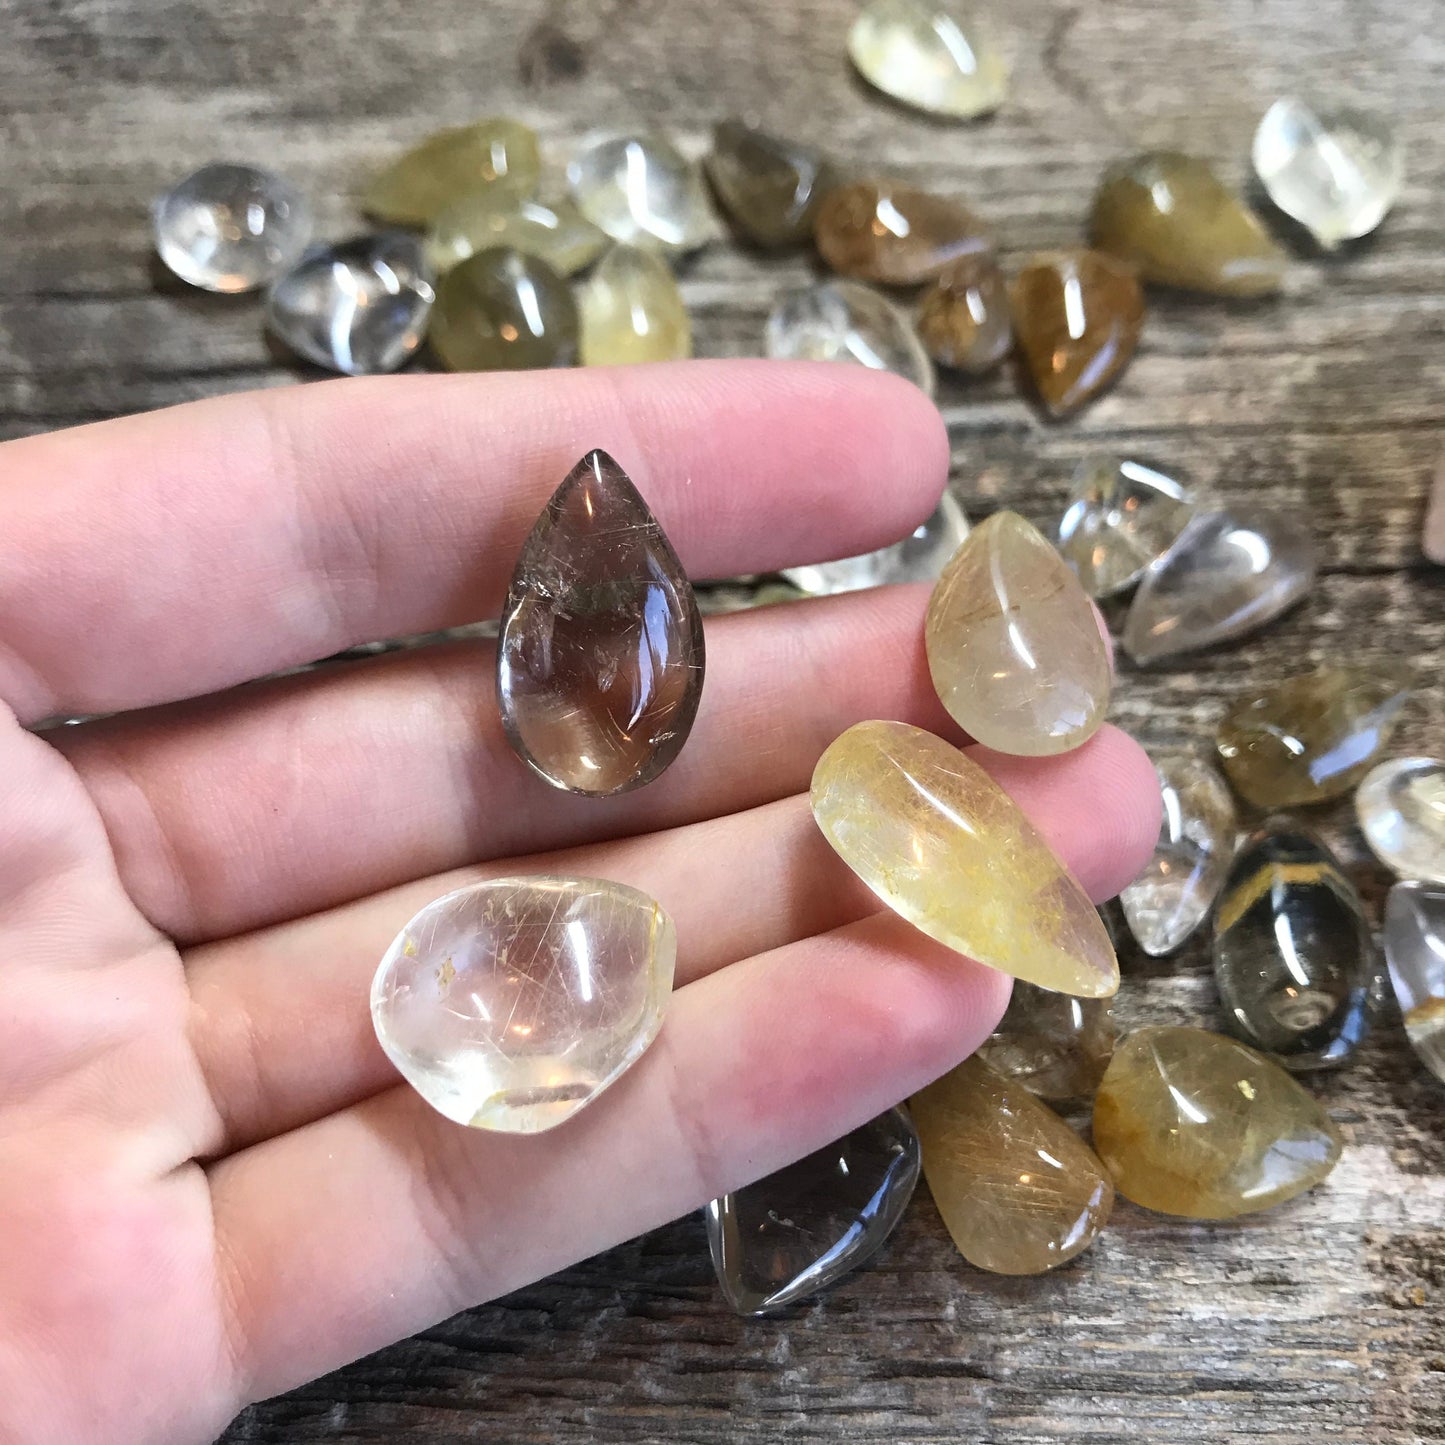 Golden Rutilated Quartz, Tumbled, Polished Rutile Quartz, One Stone (between 3/5"-1" long) for Wire Wrapping or Crystal Grid 0640